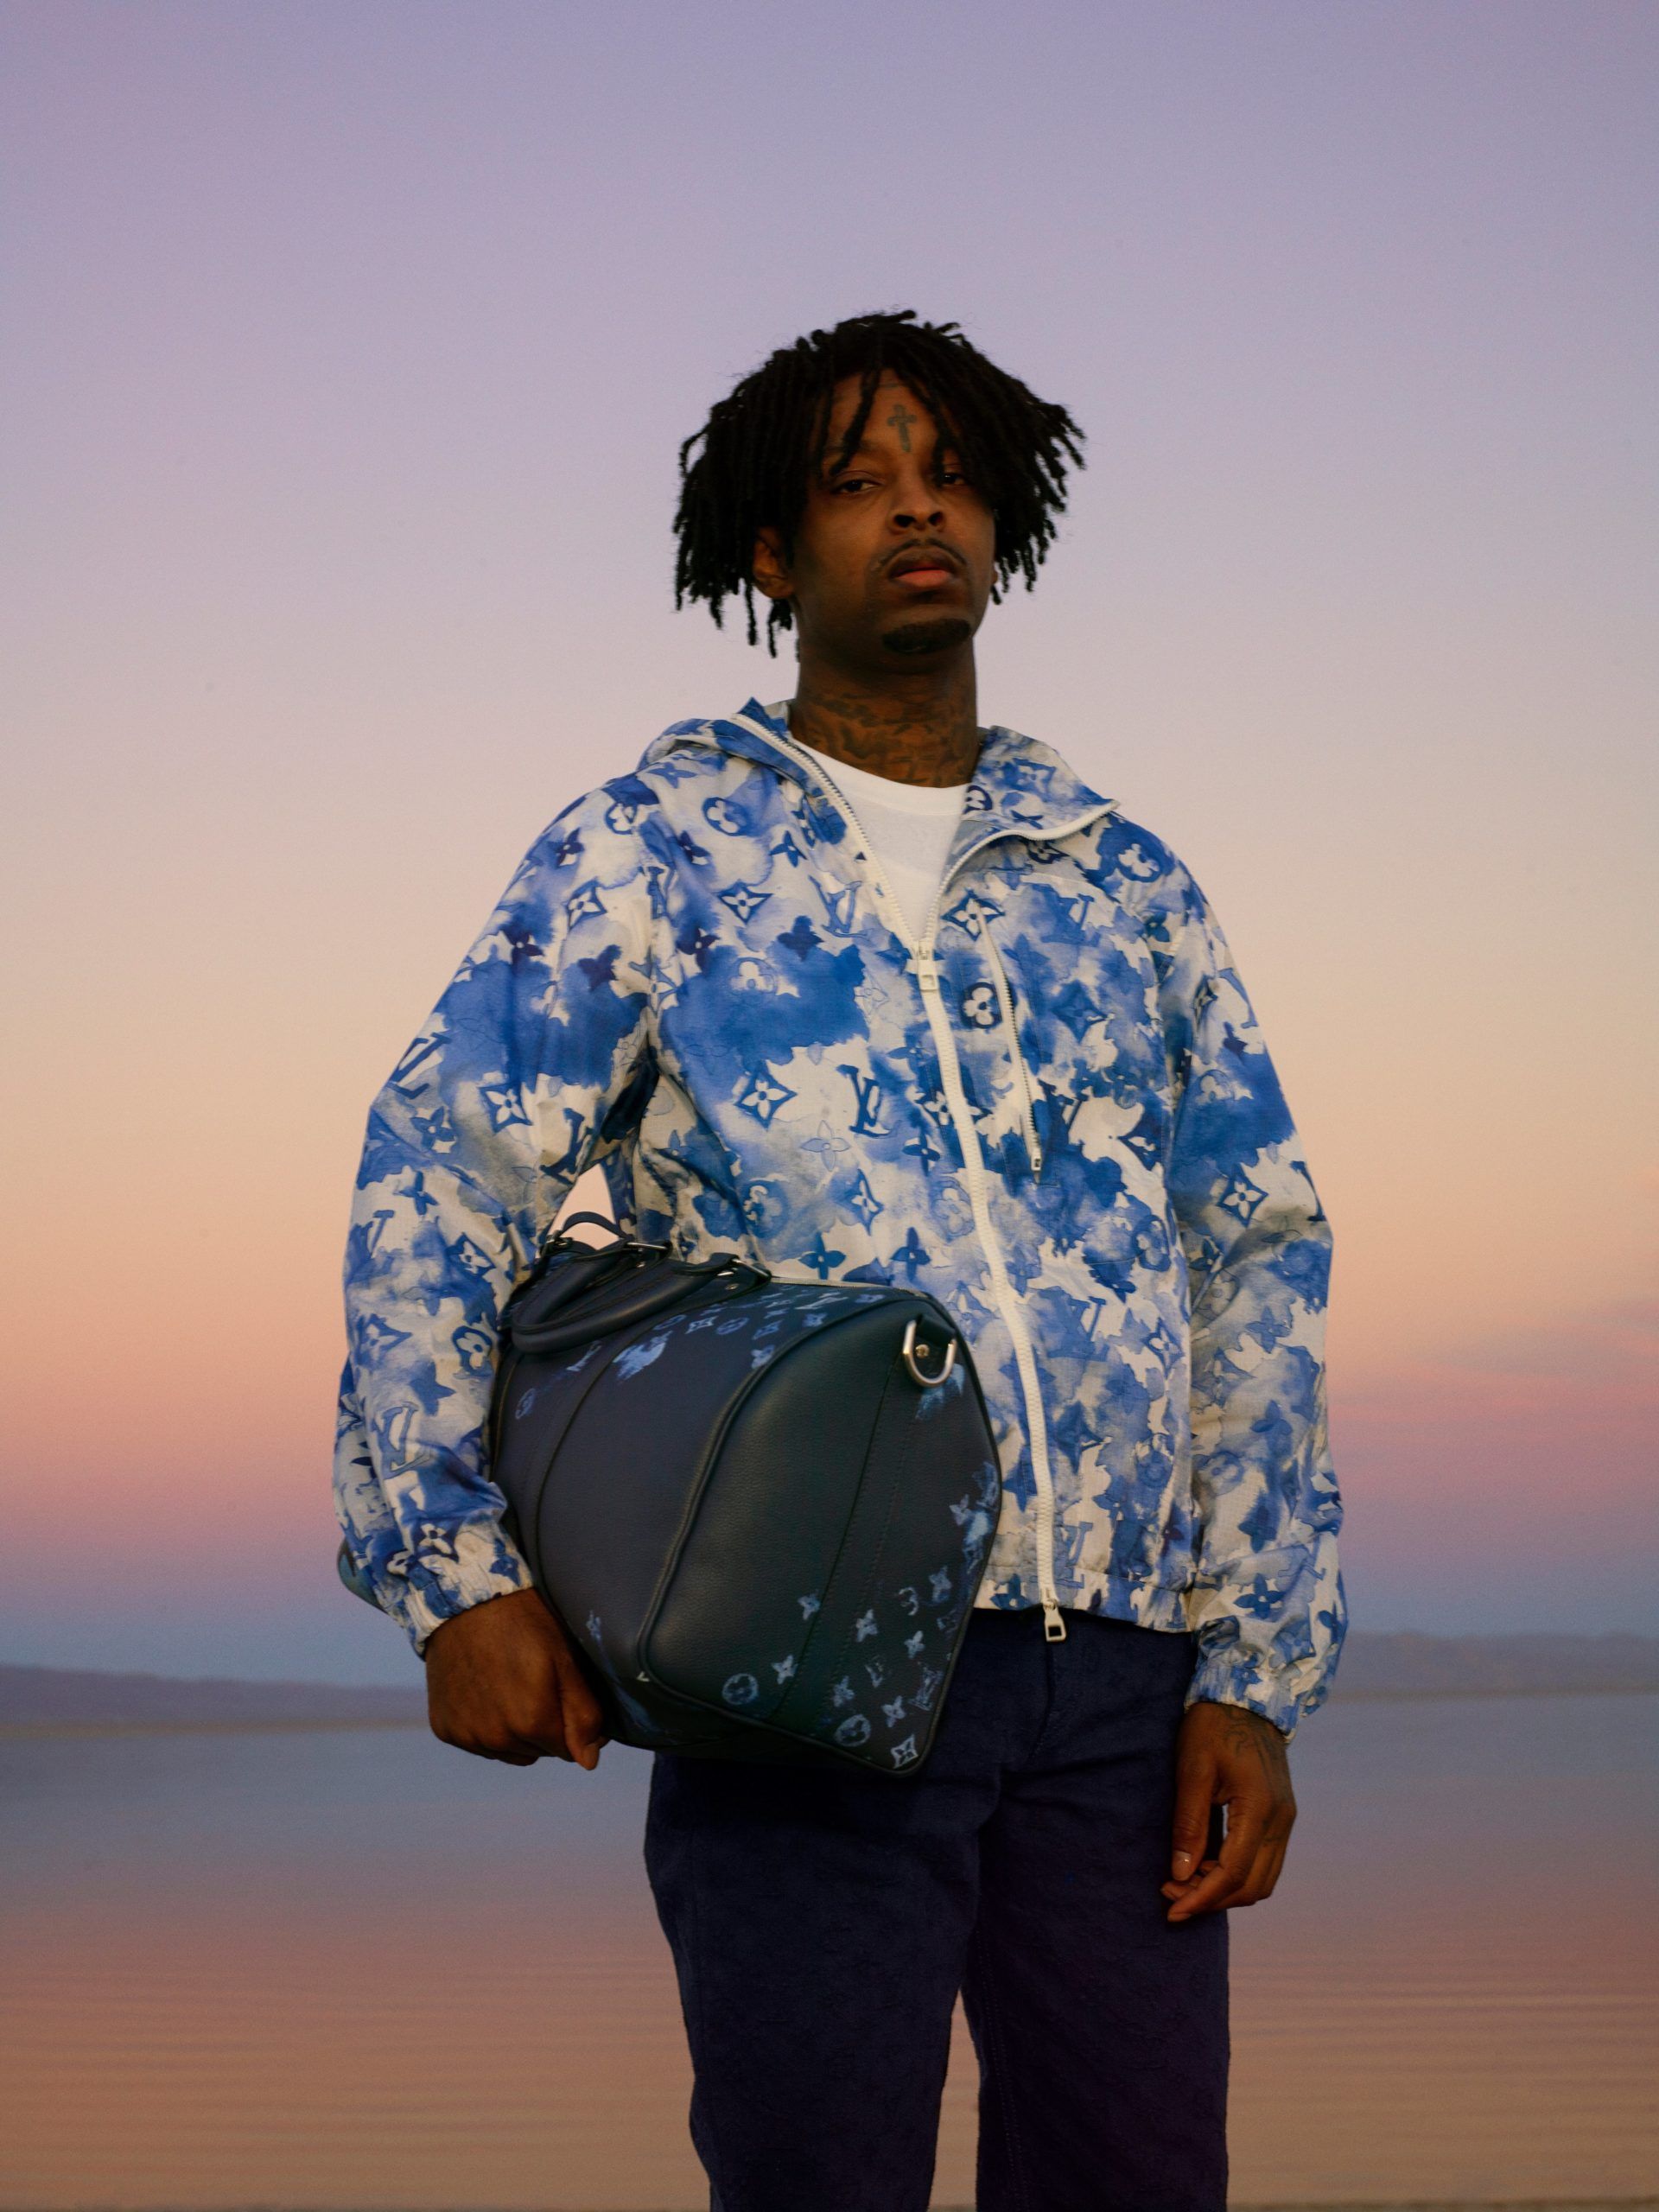 Louis Vuitton Brings Rainbow with Its Fall 2021 Capsule Collection